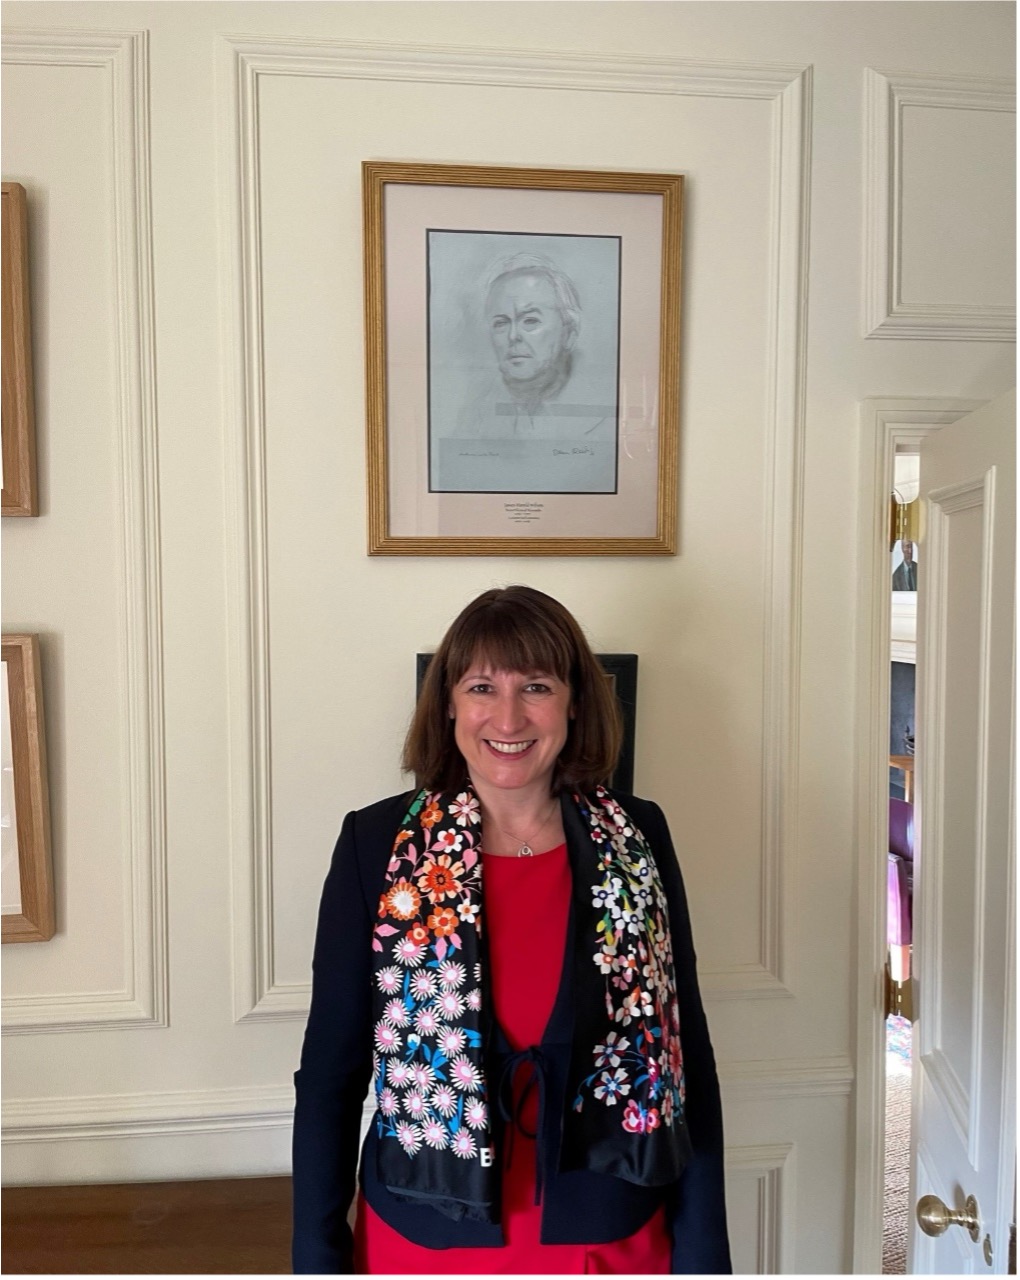 Rachel Reeves in front of the SCR portrait of Harold Wilson a former Lecturer in Economic History at New College